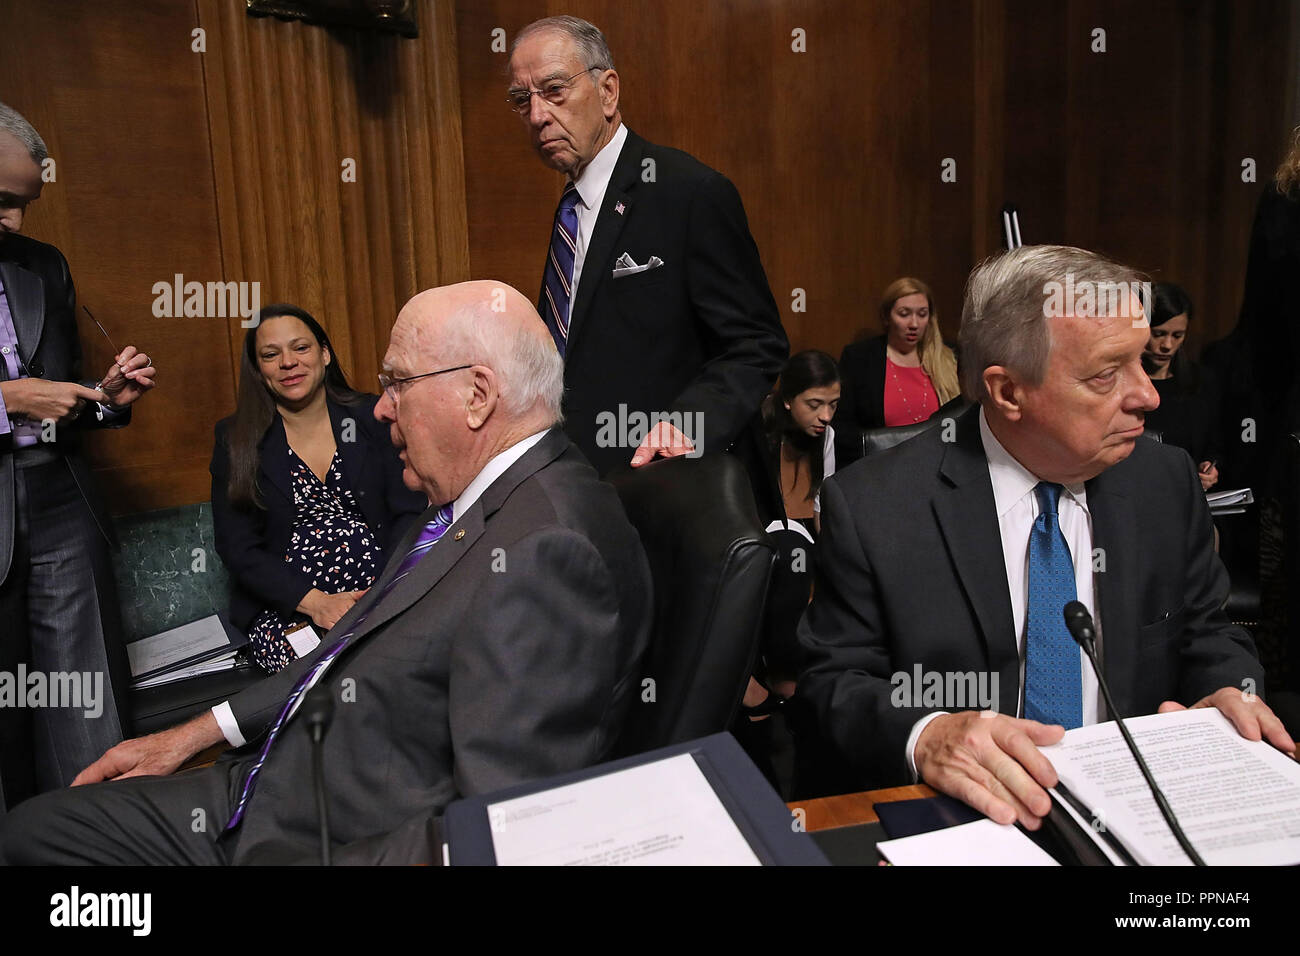 Washington, DC, USA. 27th Sep, 2018. WASHINGTON, DC - SEPTEMBER 27: Senate Judiciary Committee Chairman Charles Grassley (R-IA) (C) and committee members Sen. Patrick Leahy (D-VT) (L) and Sen. Richard Durbin (D-IL) prepare for the arrival of Christine Blasey Ford in the Dirksen Senate Office Building on Capitol Hill September 27, 2018 in Washington, DC. A professor at Palo Alto University and a research psychologist at the Stanford University School of Medicine, Ford has accused Supreme Court nominee Judge Brett Kavanaugh of sexually assaulting her during a party in 1982 when they were Stock Photo